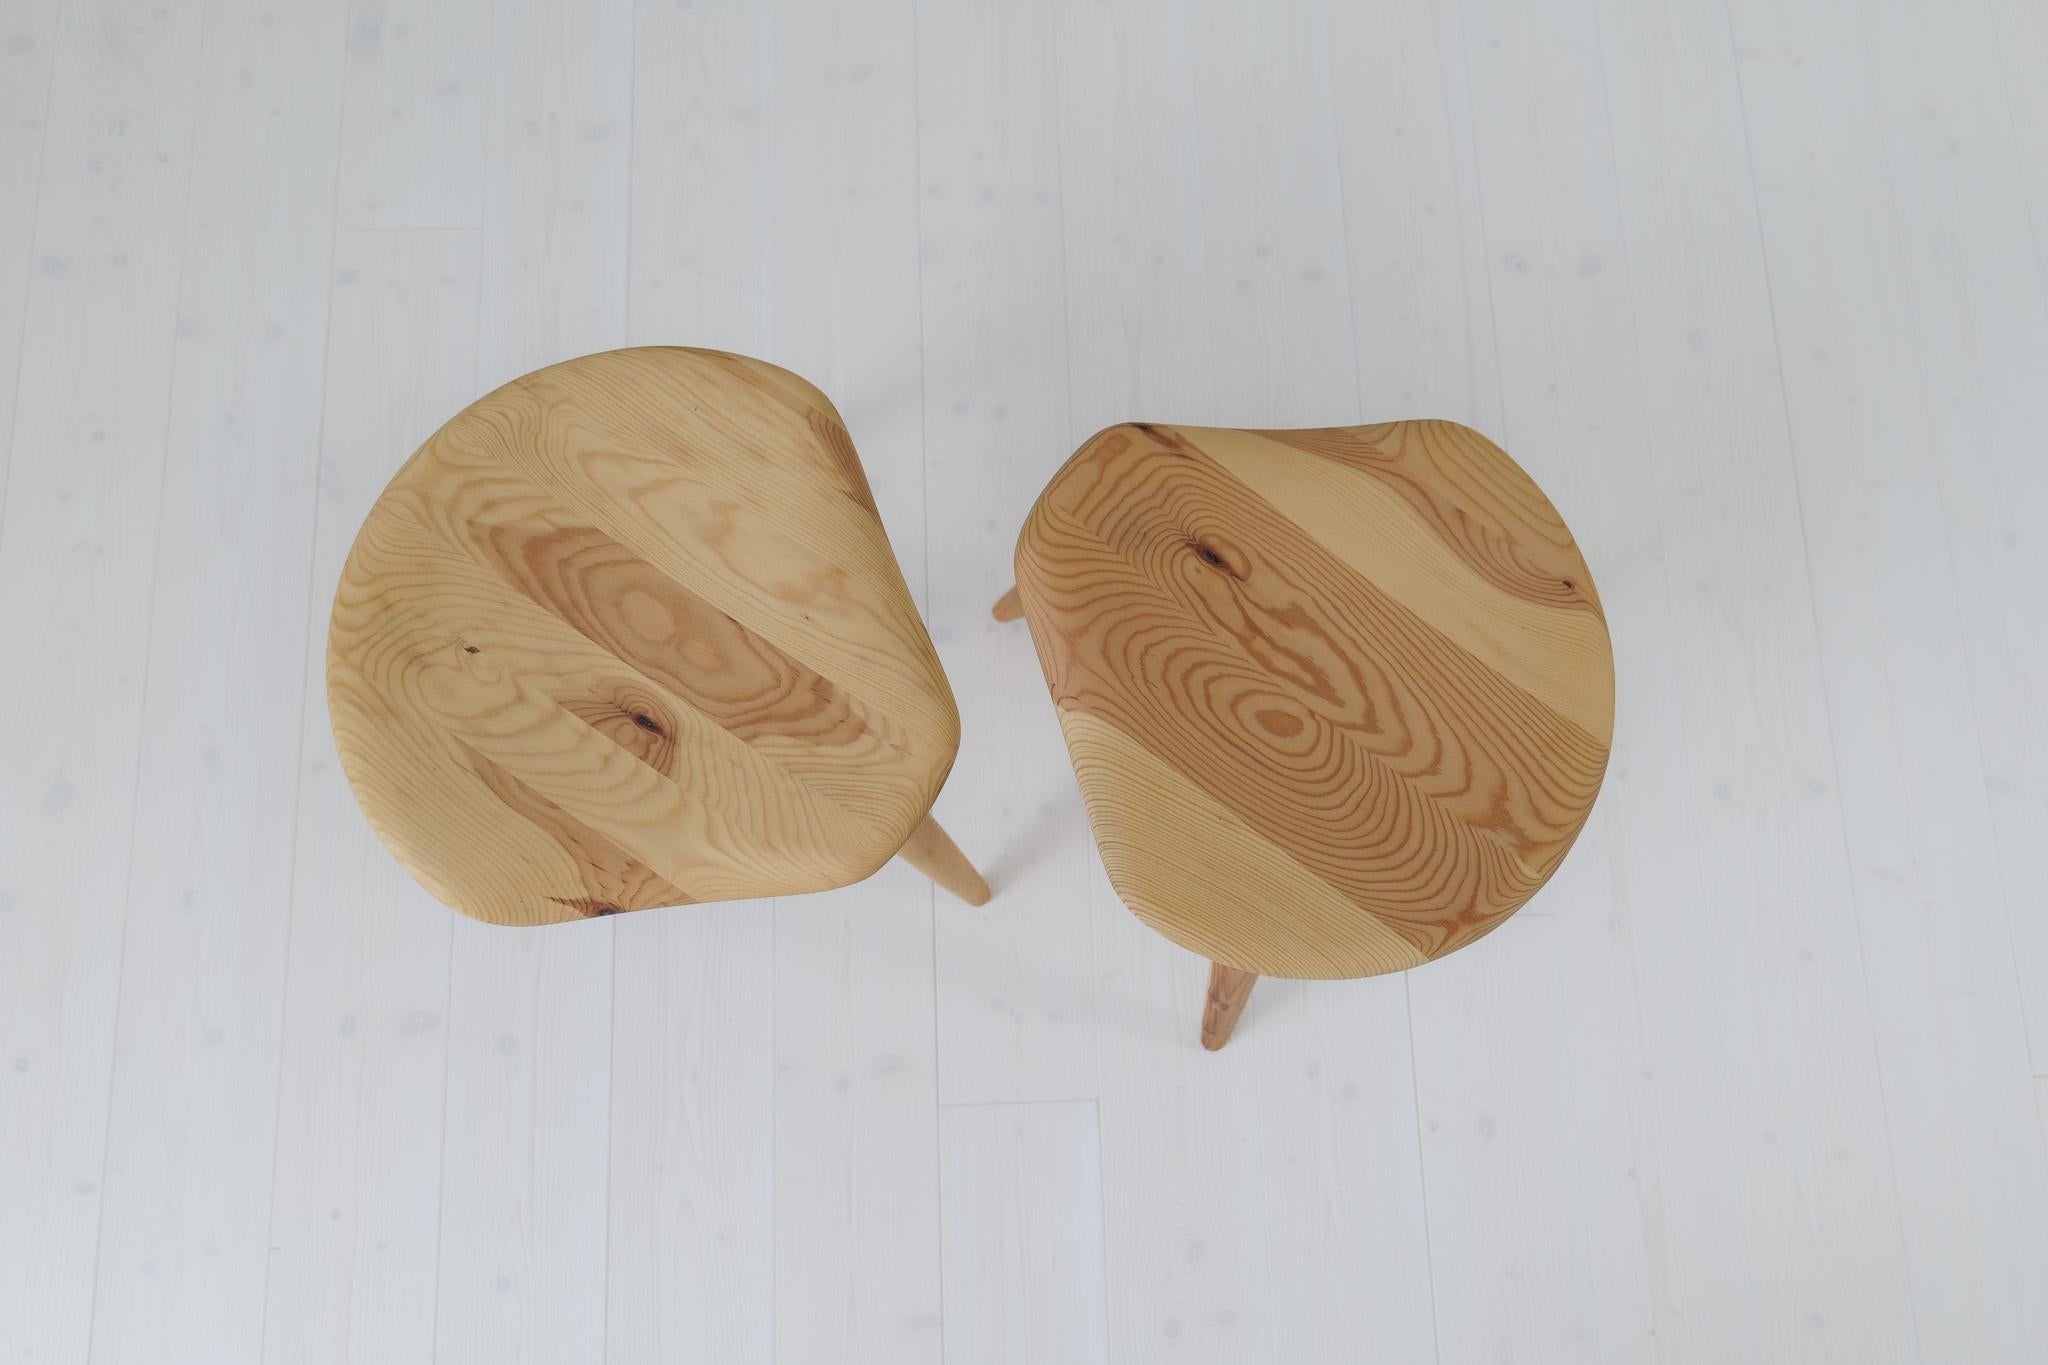 Midcentury Modern Pair Sculptural Stools in Pine by Norsk Husflid 1960s Norway In Good Condition For Sale In Hillringsberg, SE